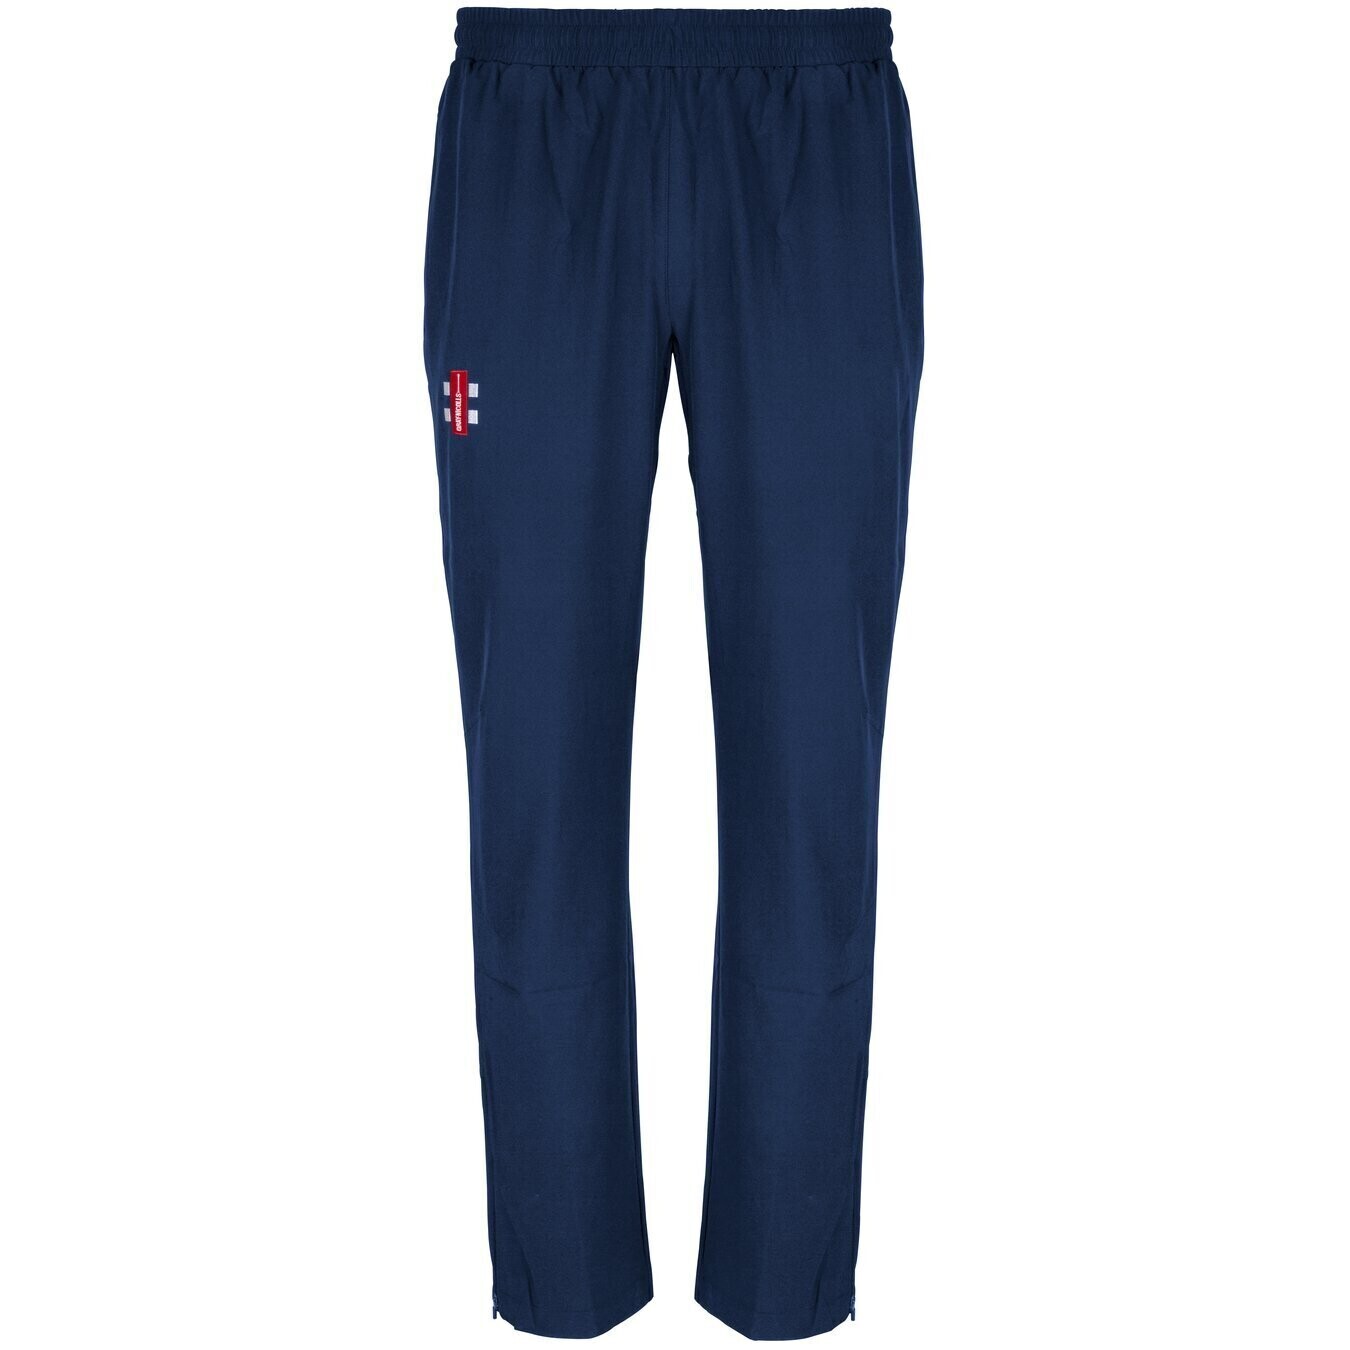 East Cowton Velocity Training Trousers